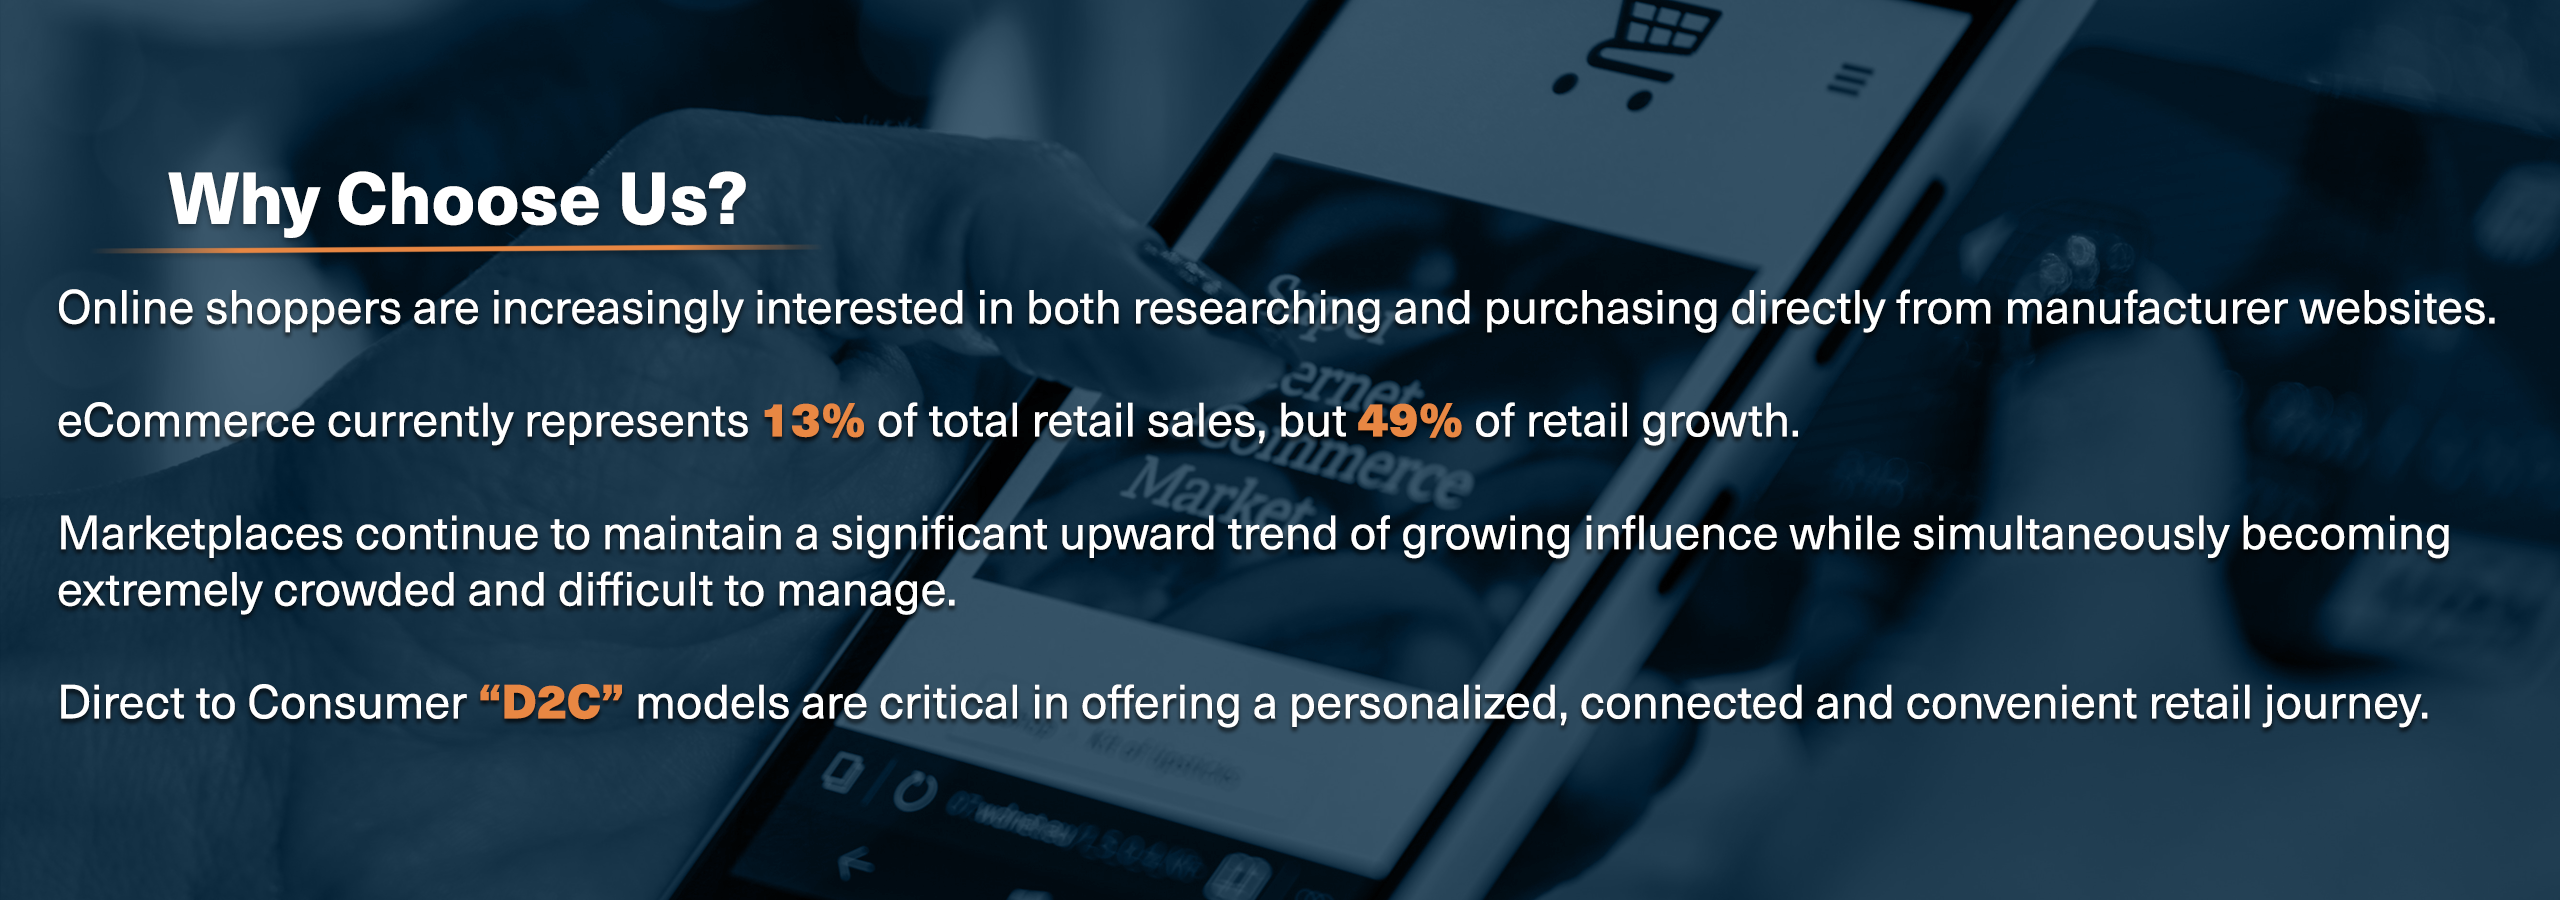 More and more online shoppers are interested in purchasing directly from manufacturers. Having a Direct to Consumer model is critical for capitalizing on this market trend.